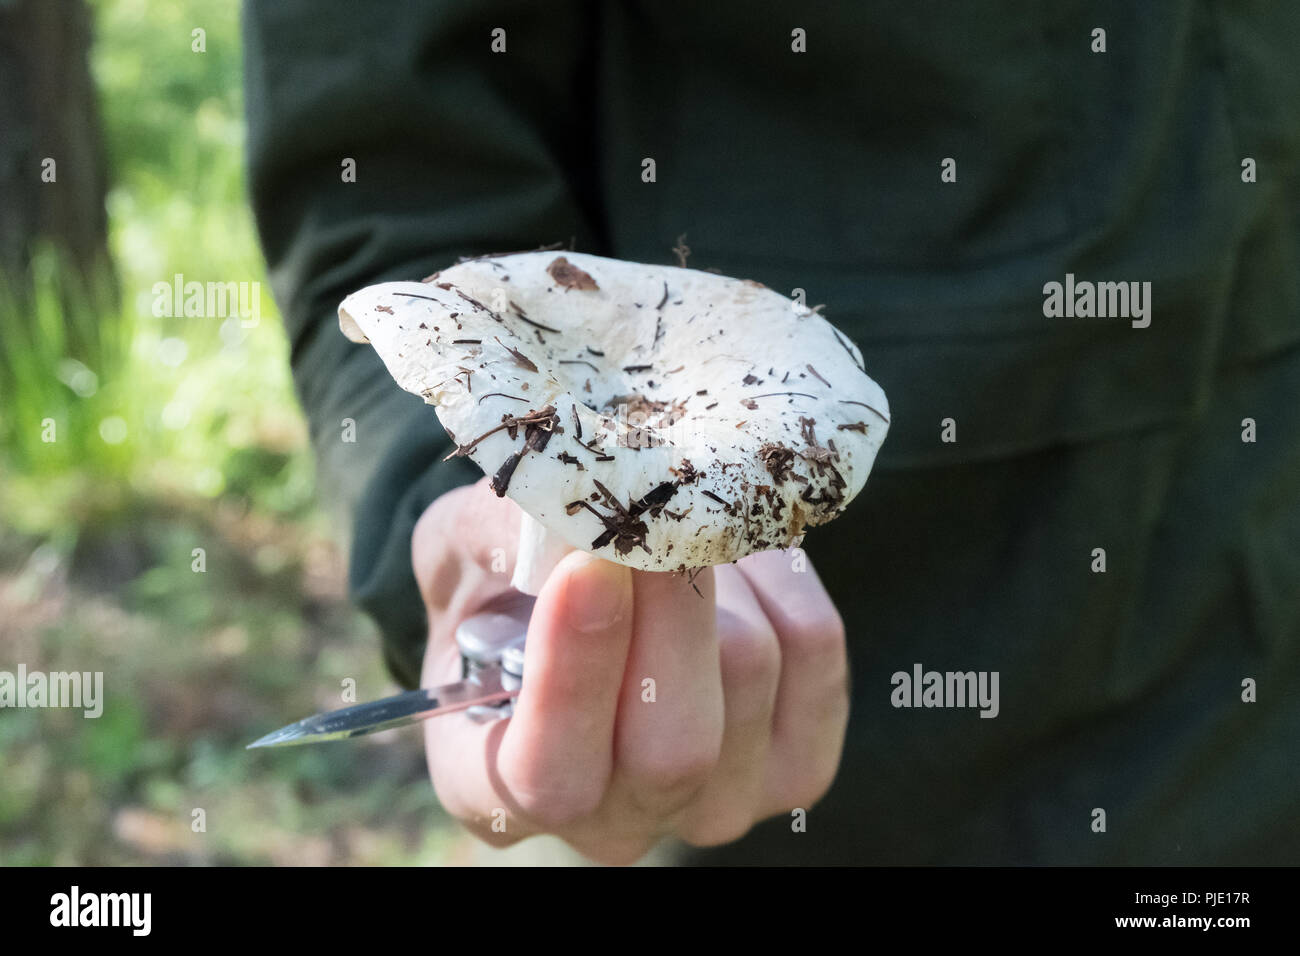 A man found a mushroom in the forest. Holds a mushroom in his hand. Lactarius resimus Stock Photo